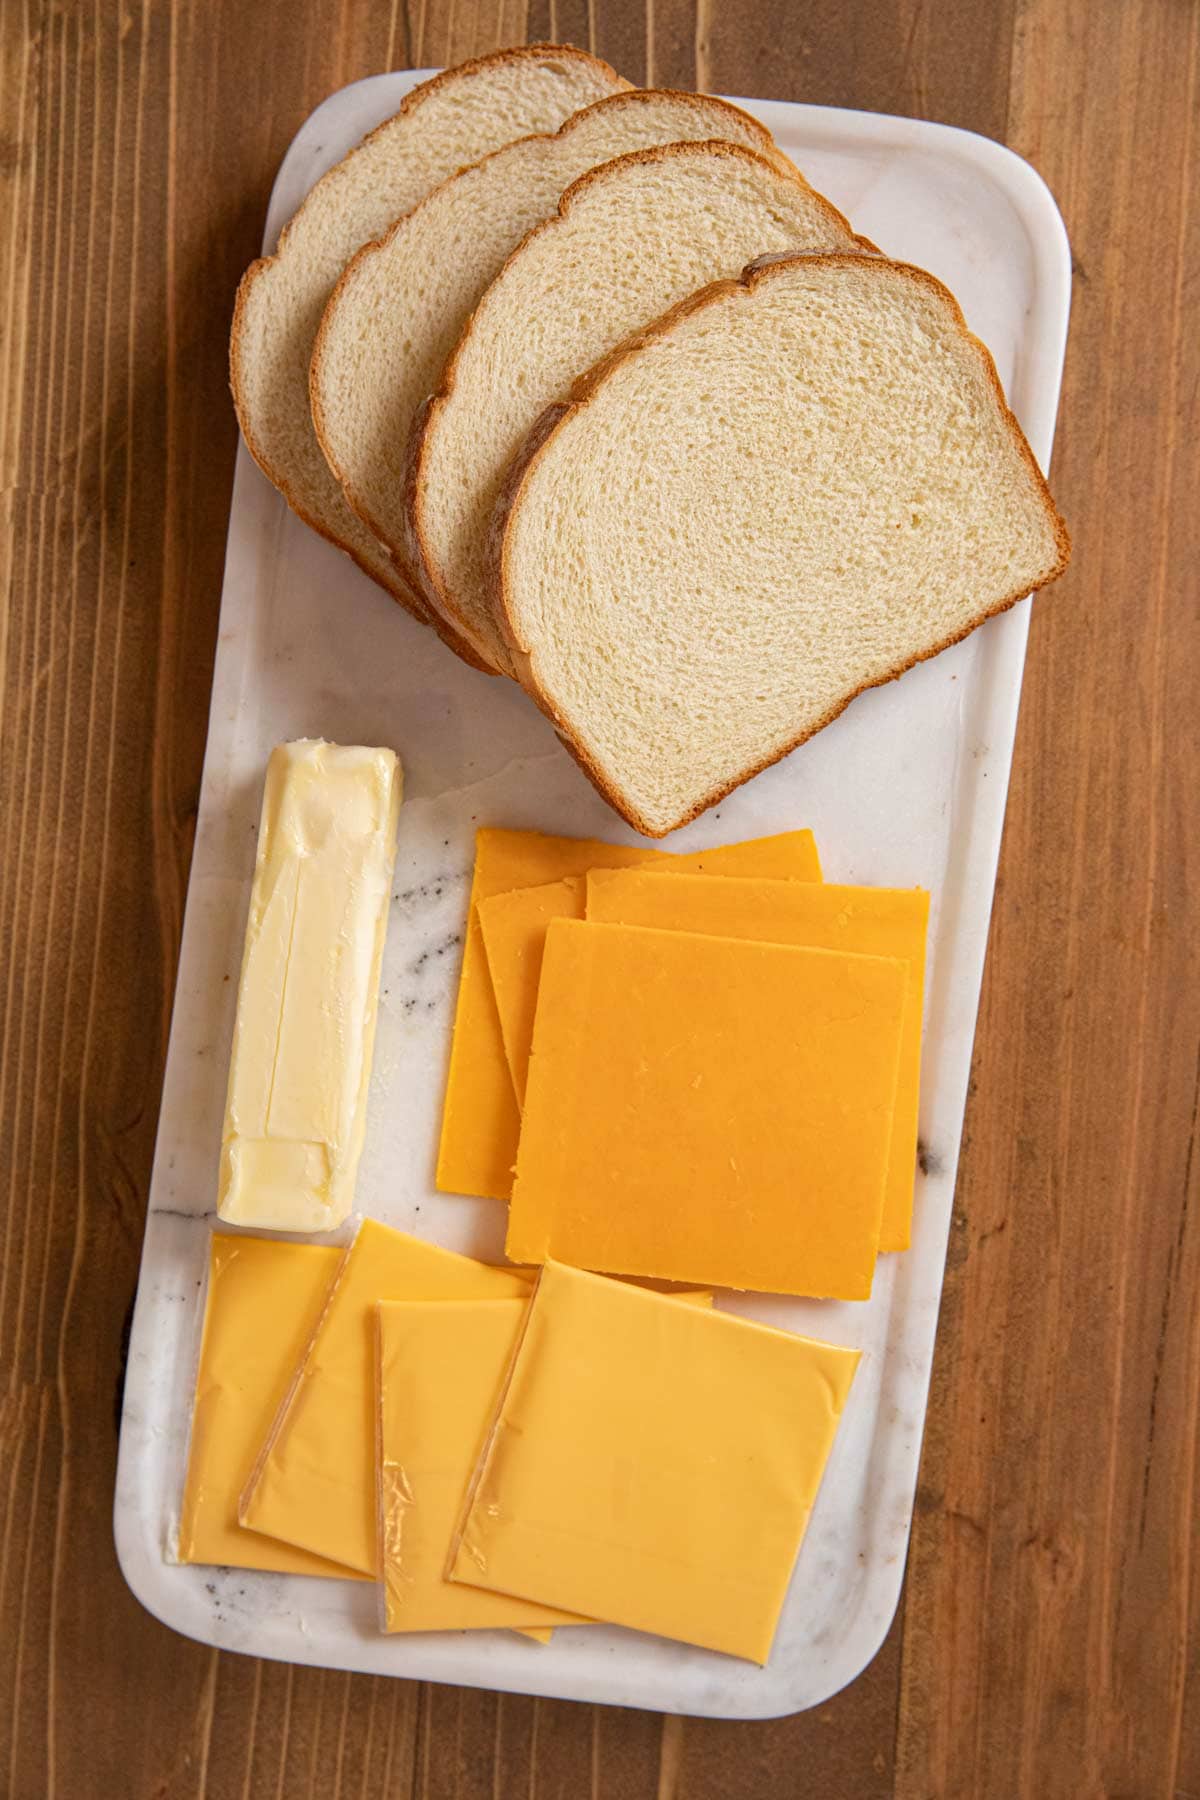 Grilled Cheese Sandwiches bread, cheese, and butter on cutting board